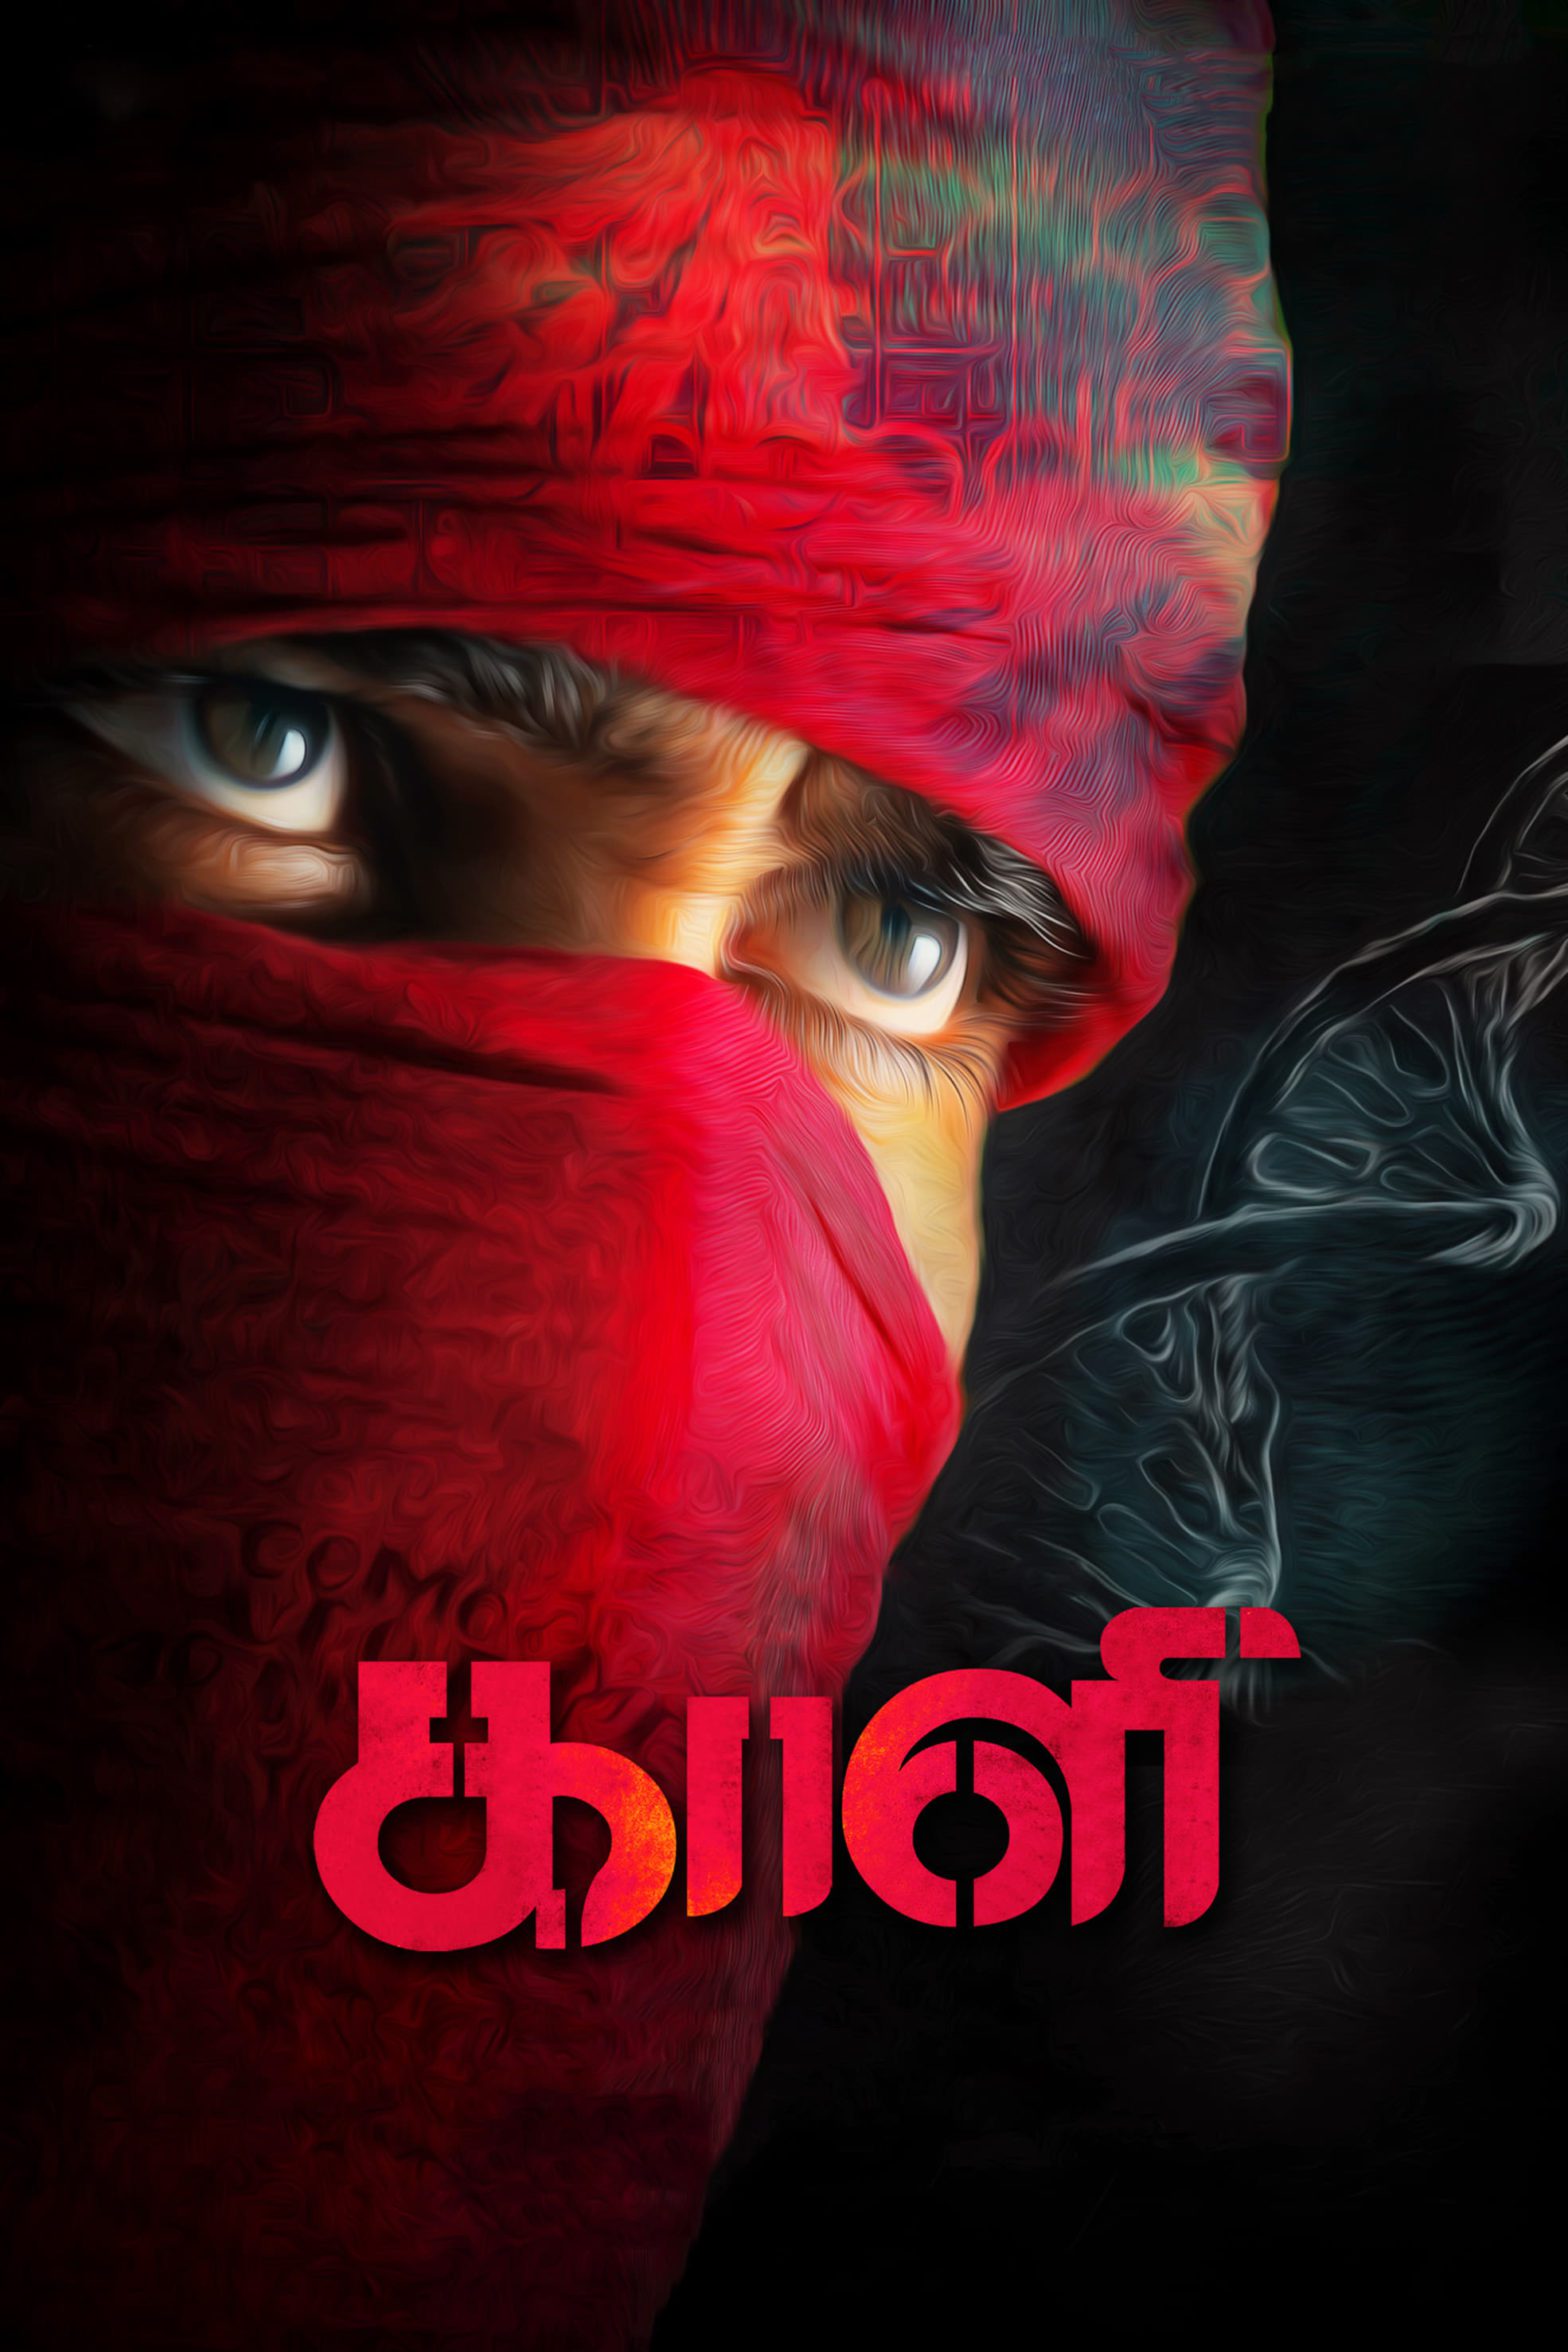 Poster for the movie "Kaali"